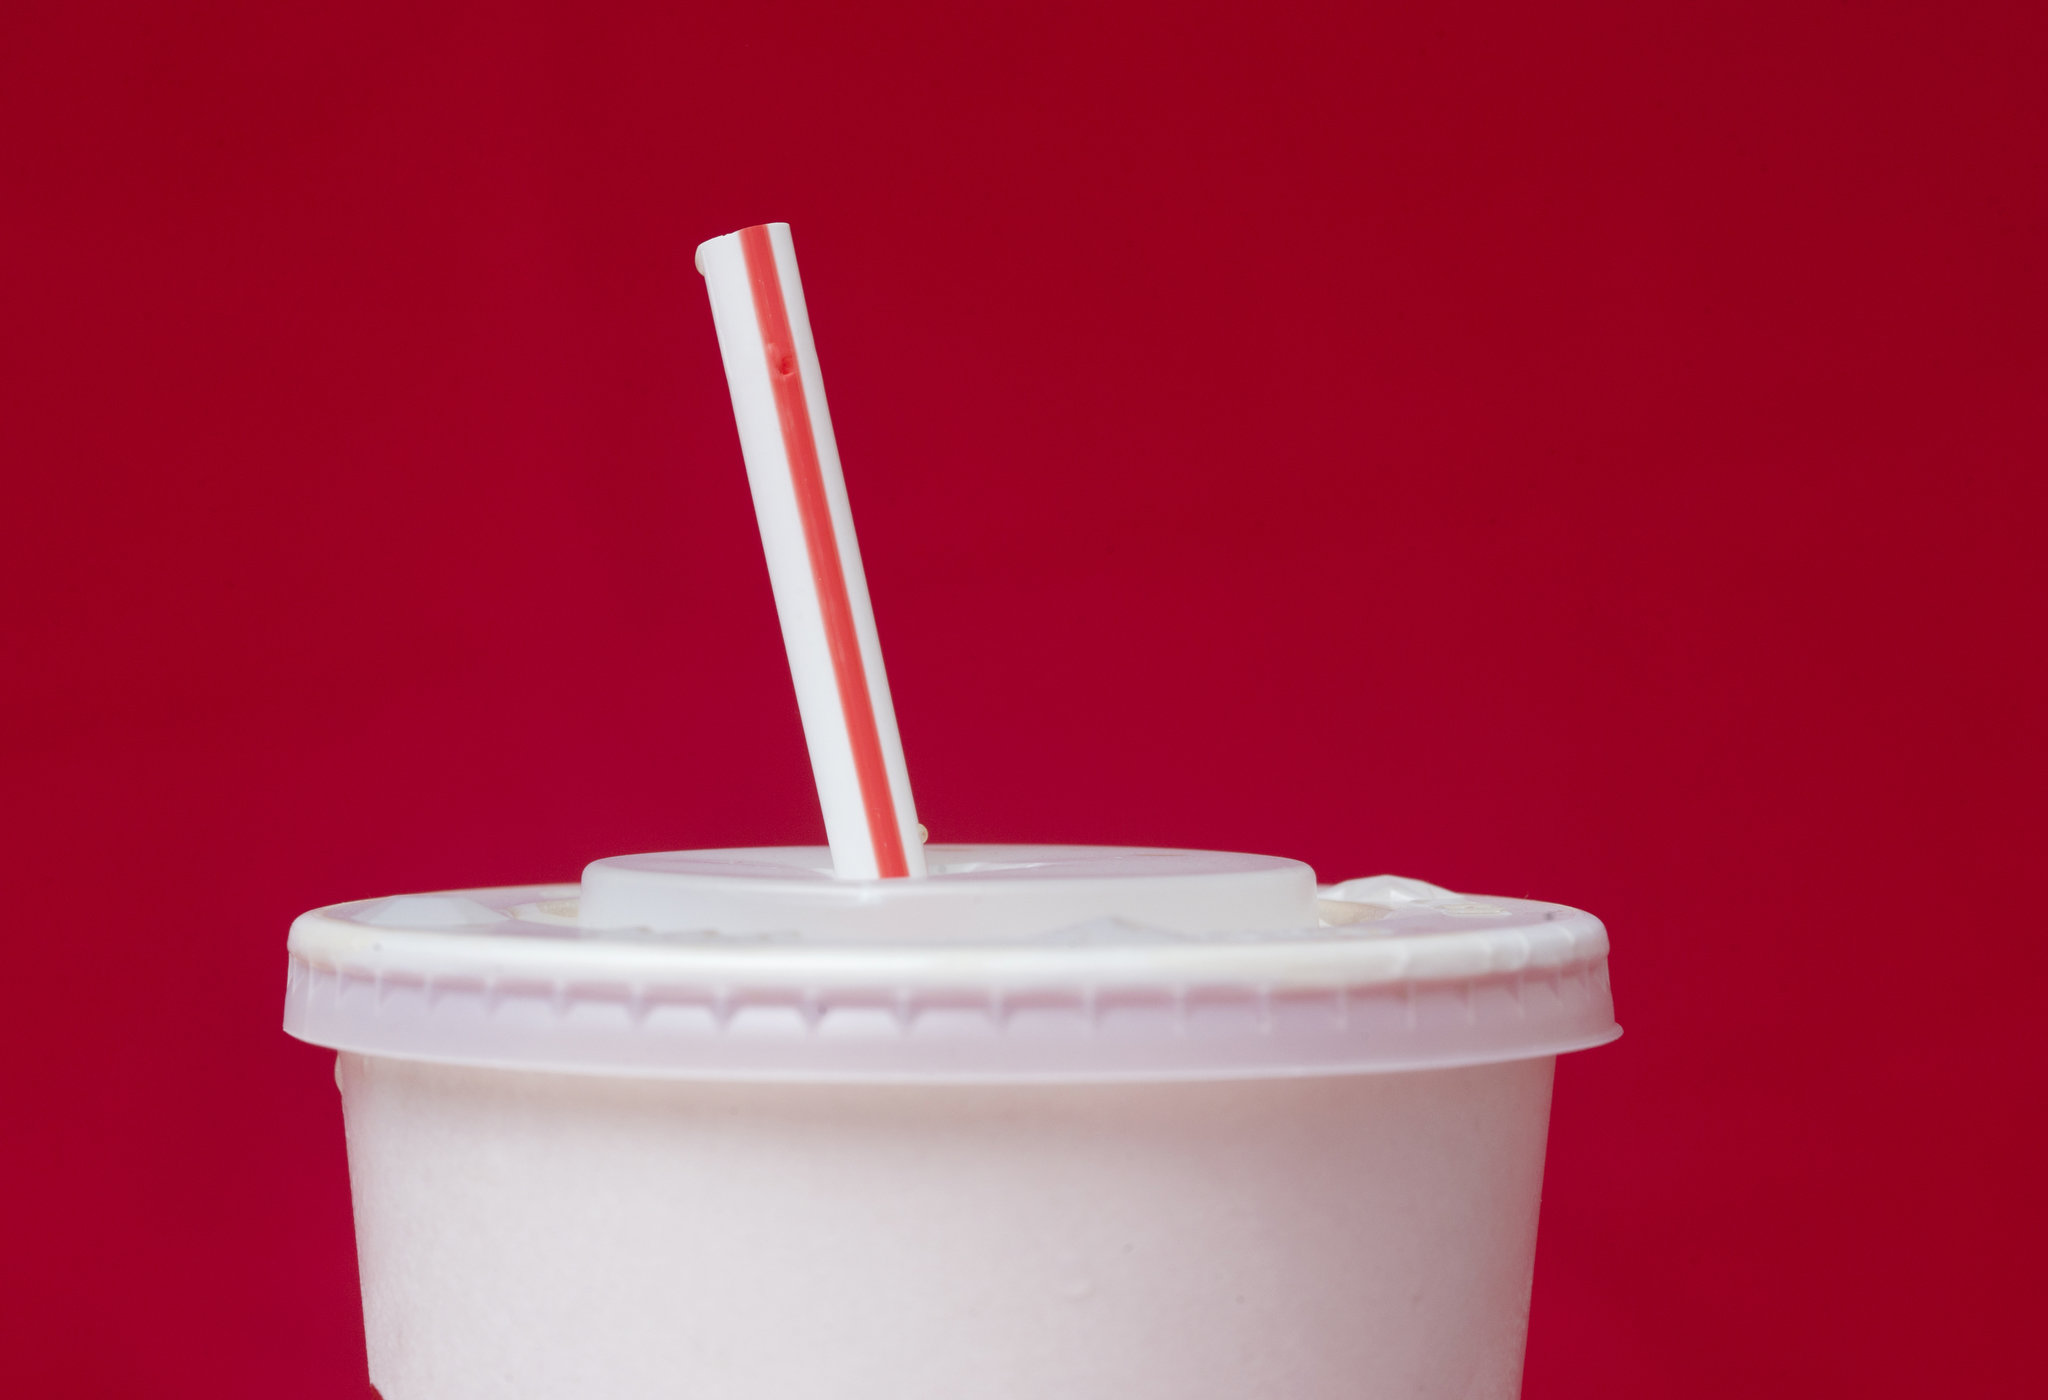 Portland likely to limit use of plastic straws | OregonLive.com